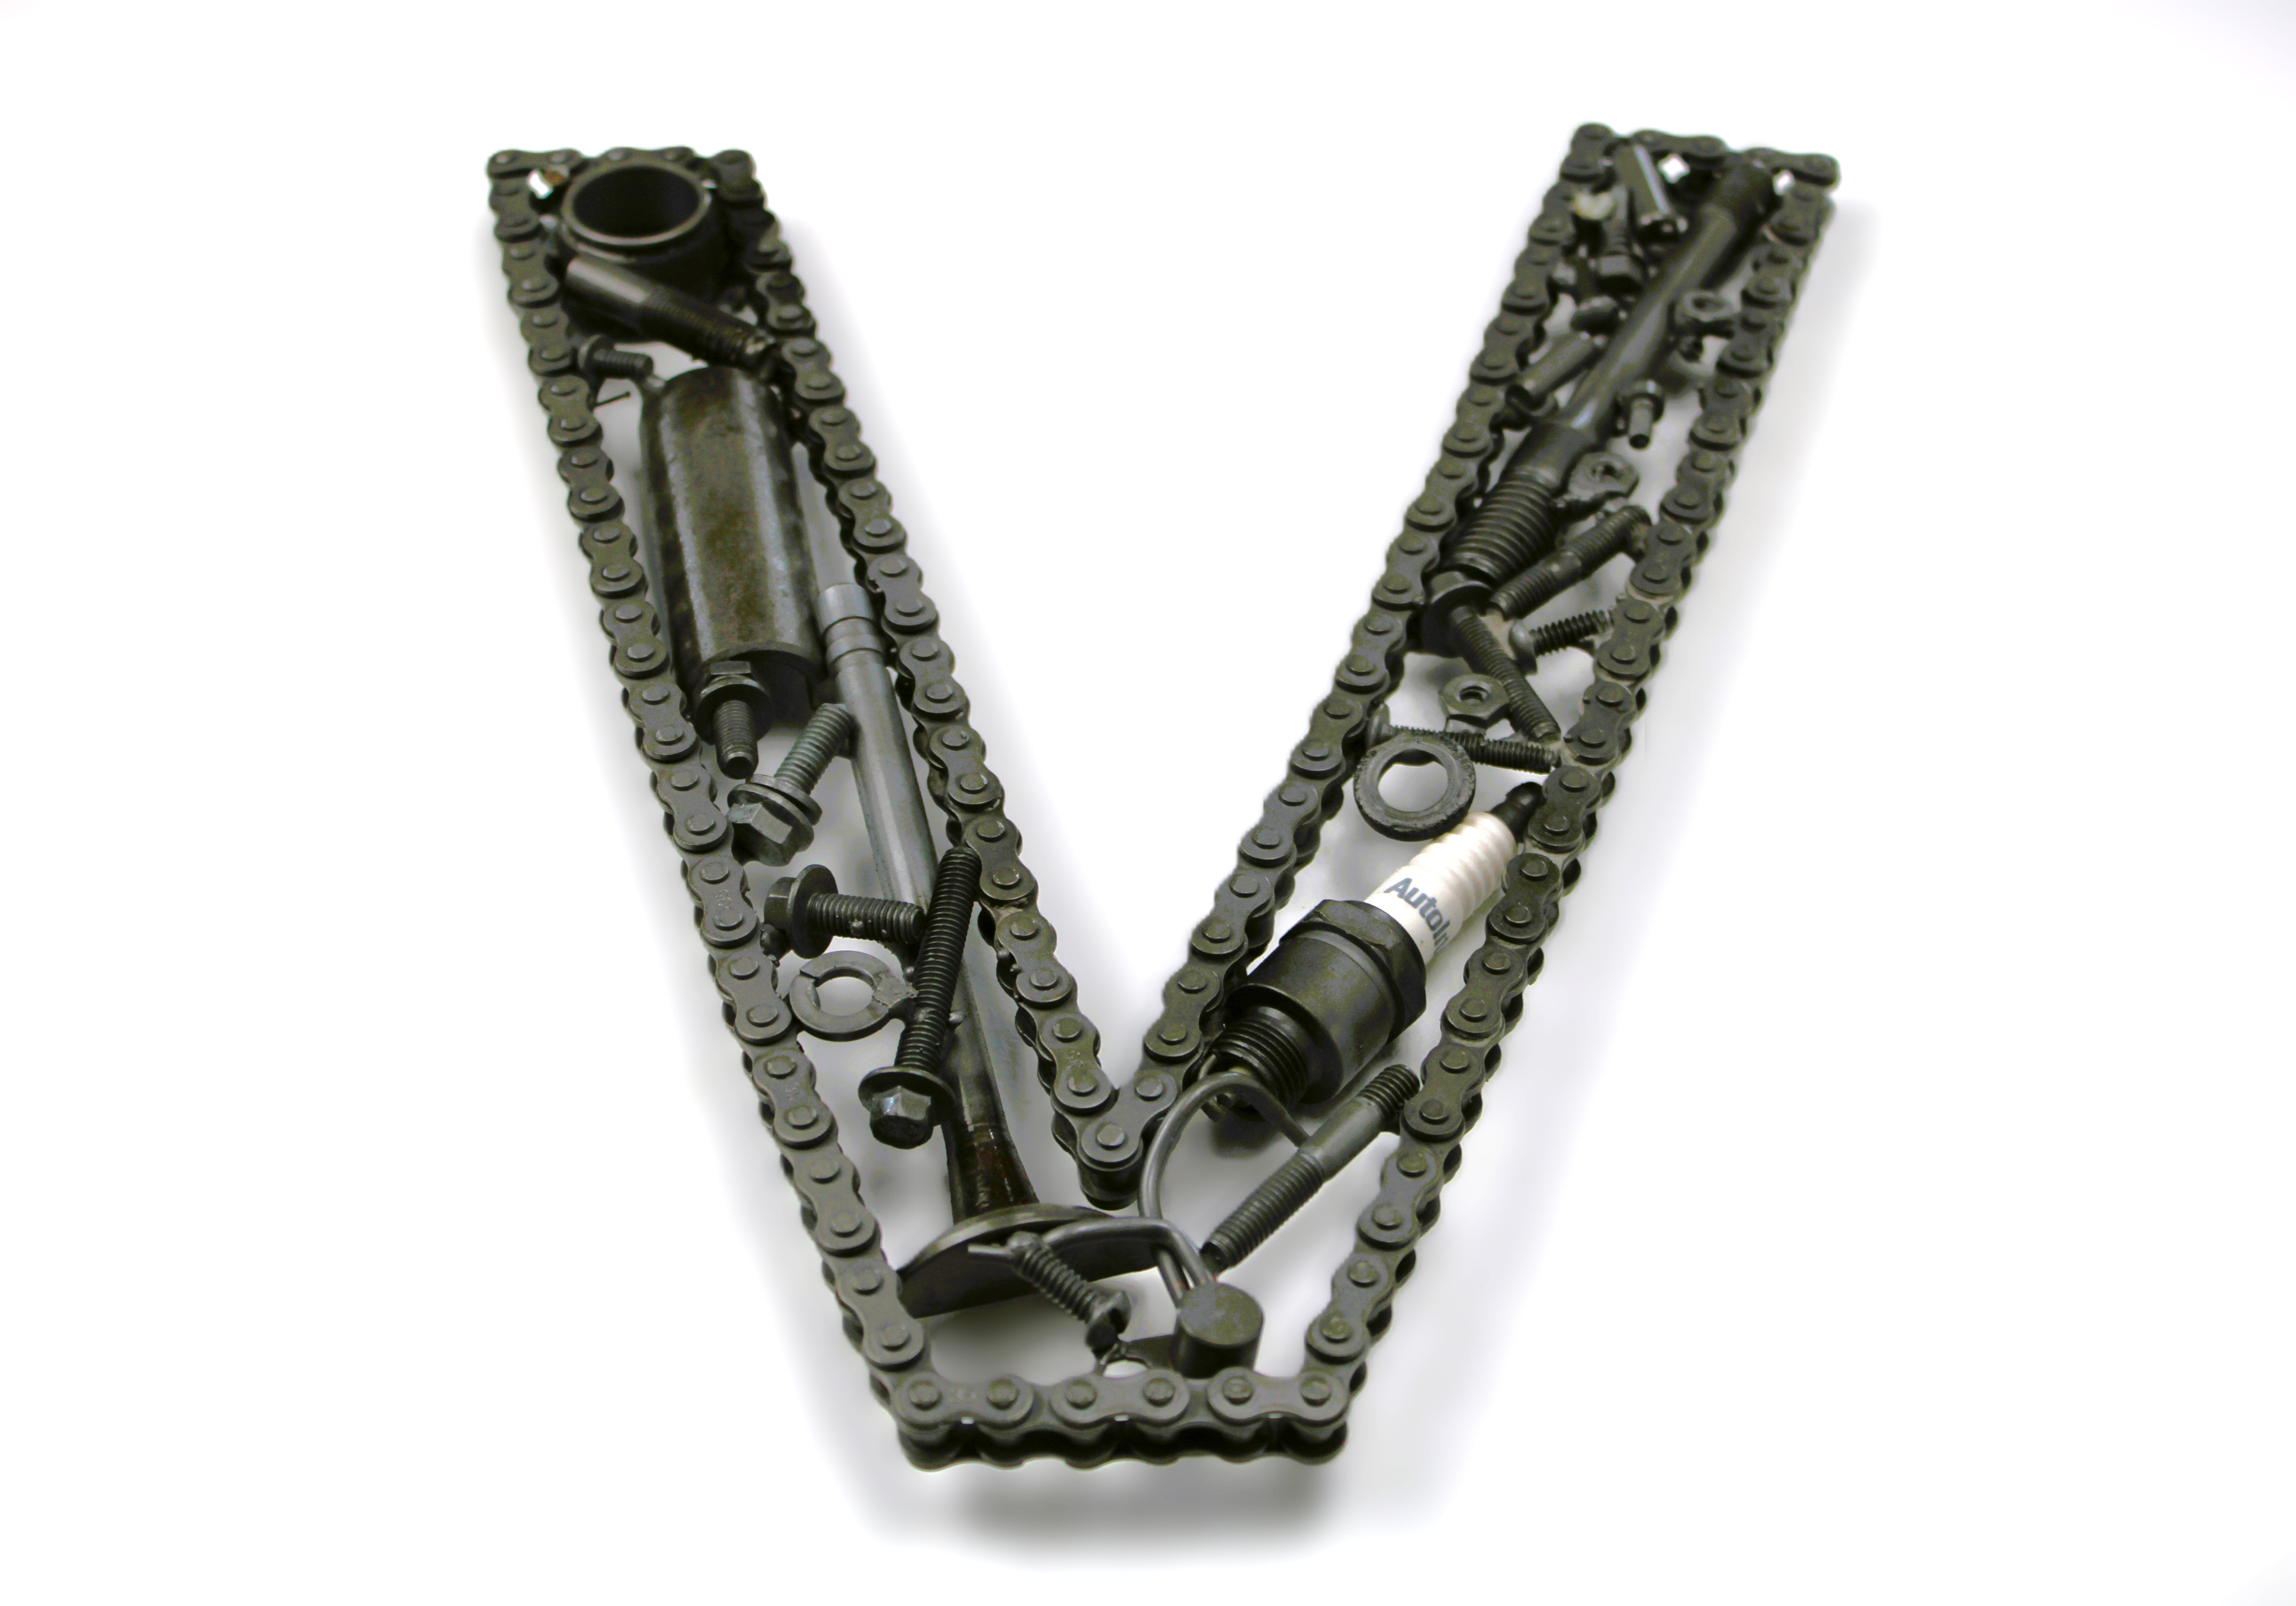 Close-up view of a letter V made out of real car parts, outlined with a timing chain.